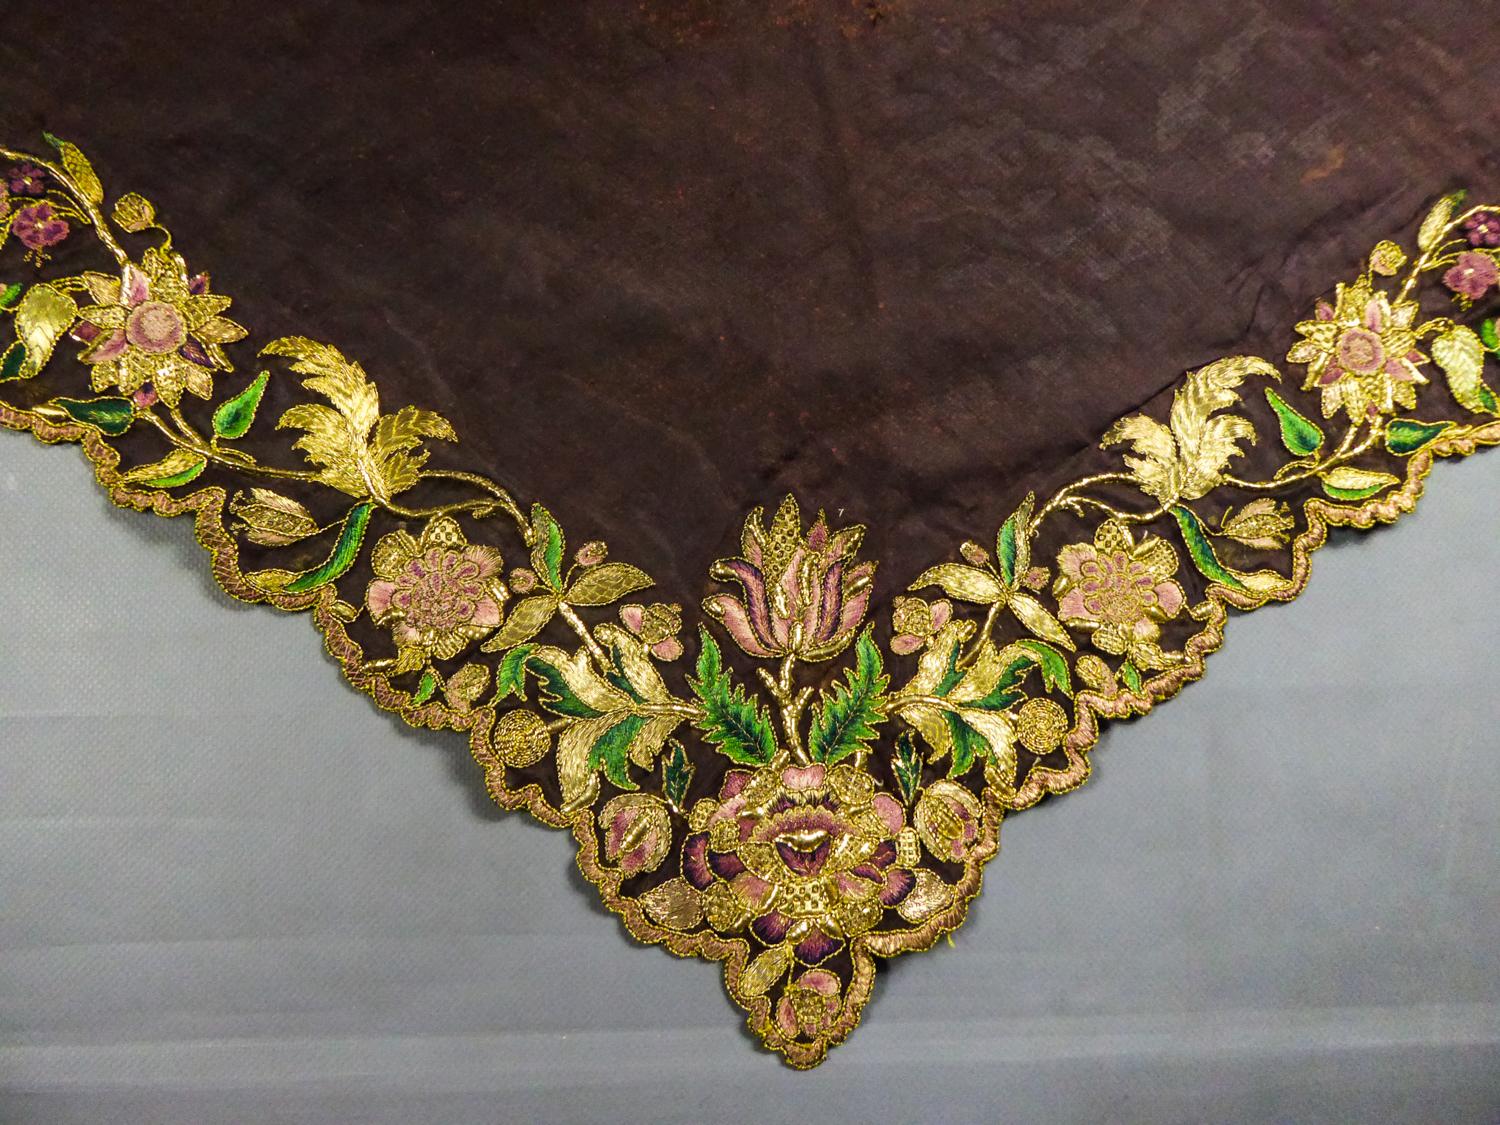 First half of the 18th century
Germany or Europe

Fichu or Palatine kerchief in brown silk gauze densely embroidered and scalloped with scrolls of exotic flowers. Skillful professional embroidery in guipure, crimped, embossed with gold lamé threads.